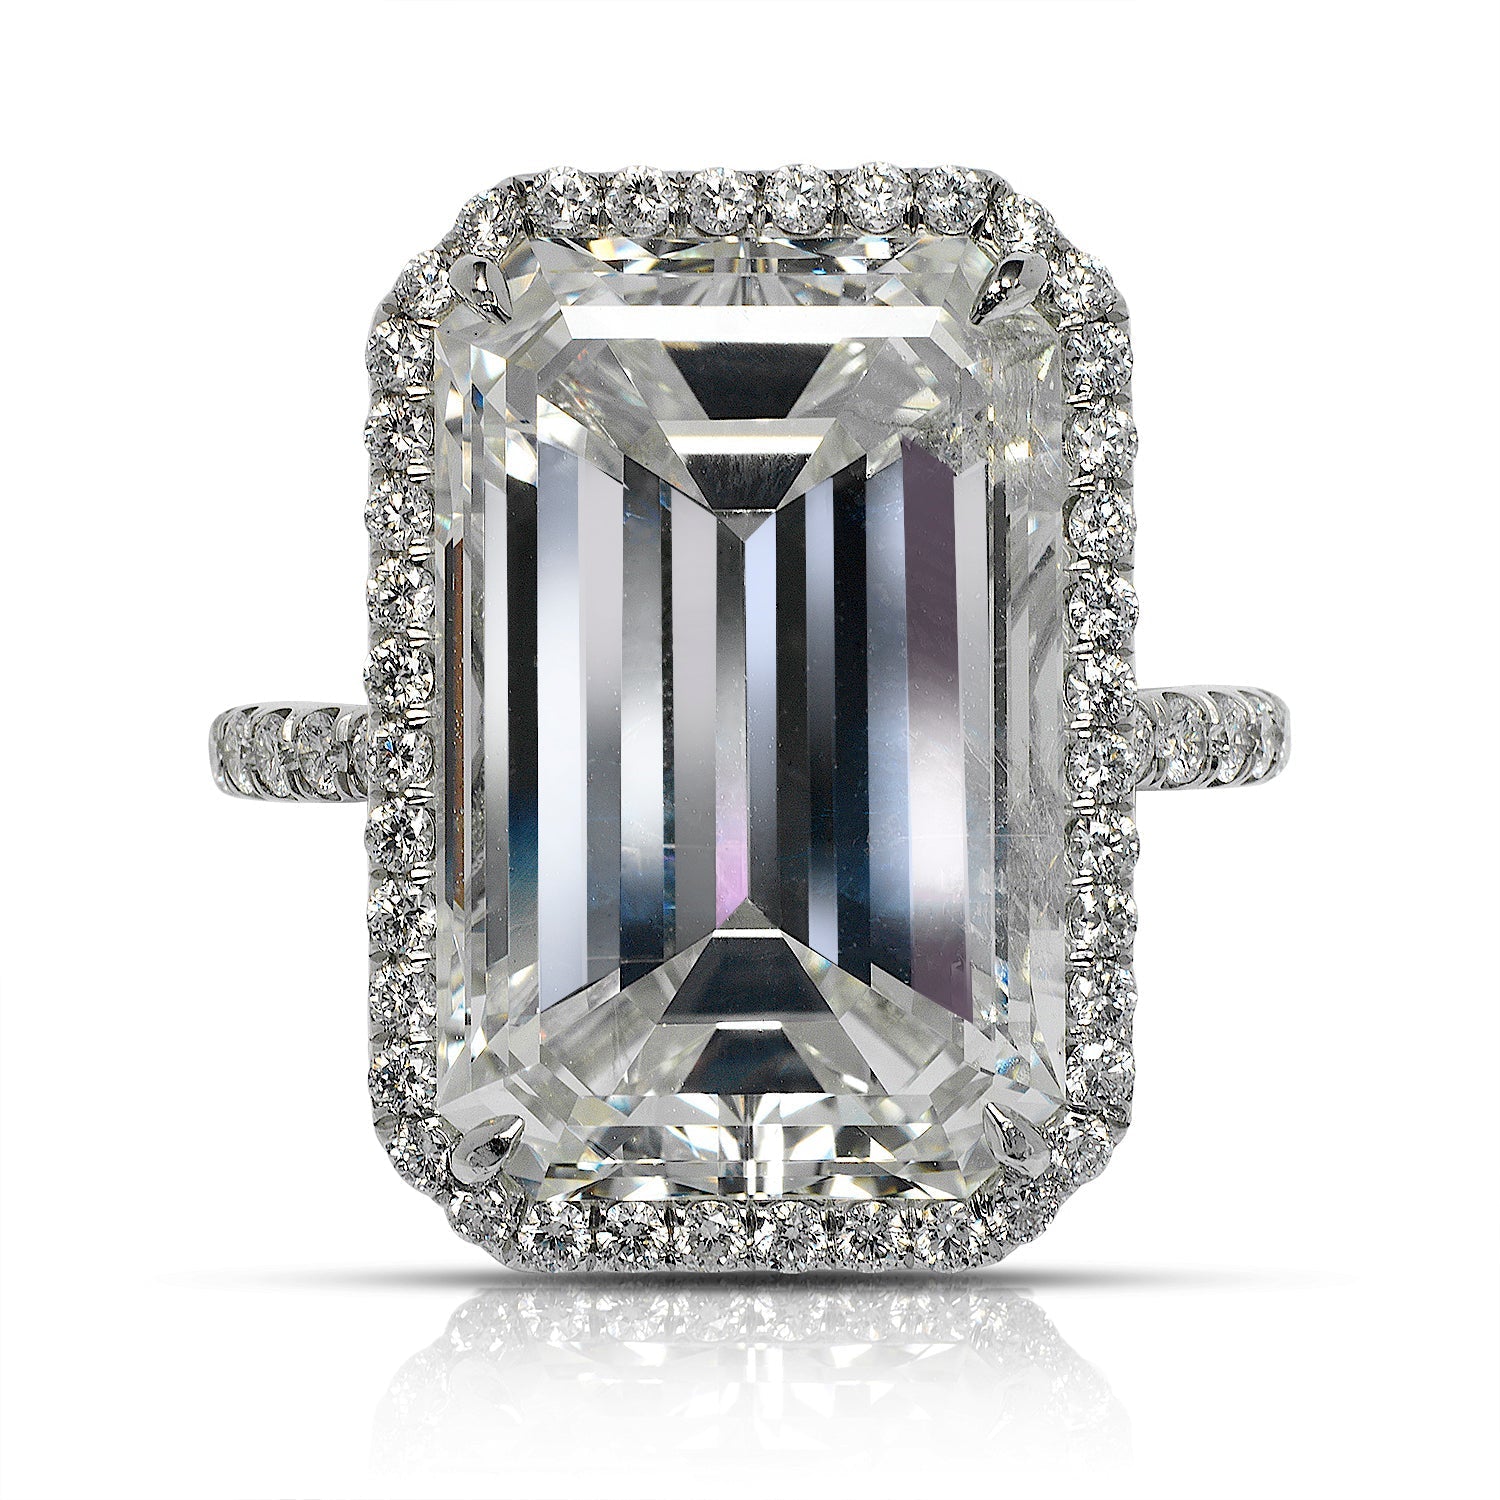 Diamond Ring Emerald Cut 13 Carat Halo Ring in Platinum Front View